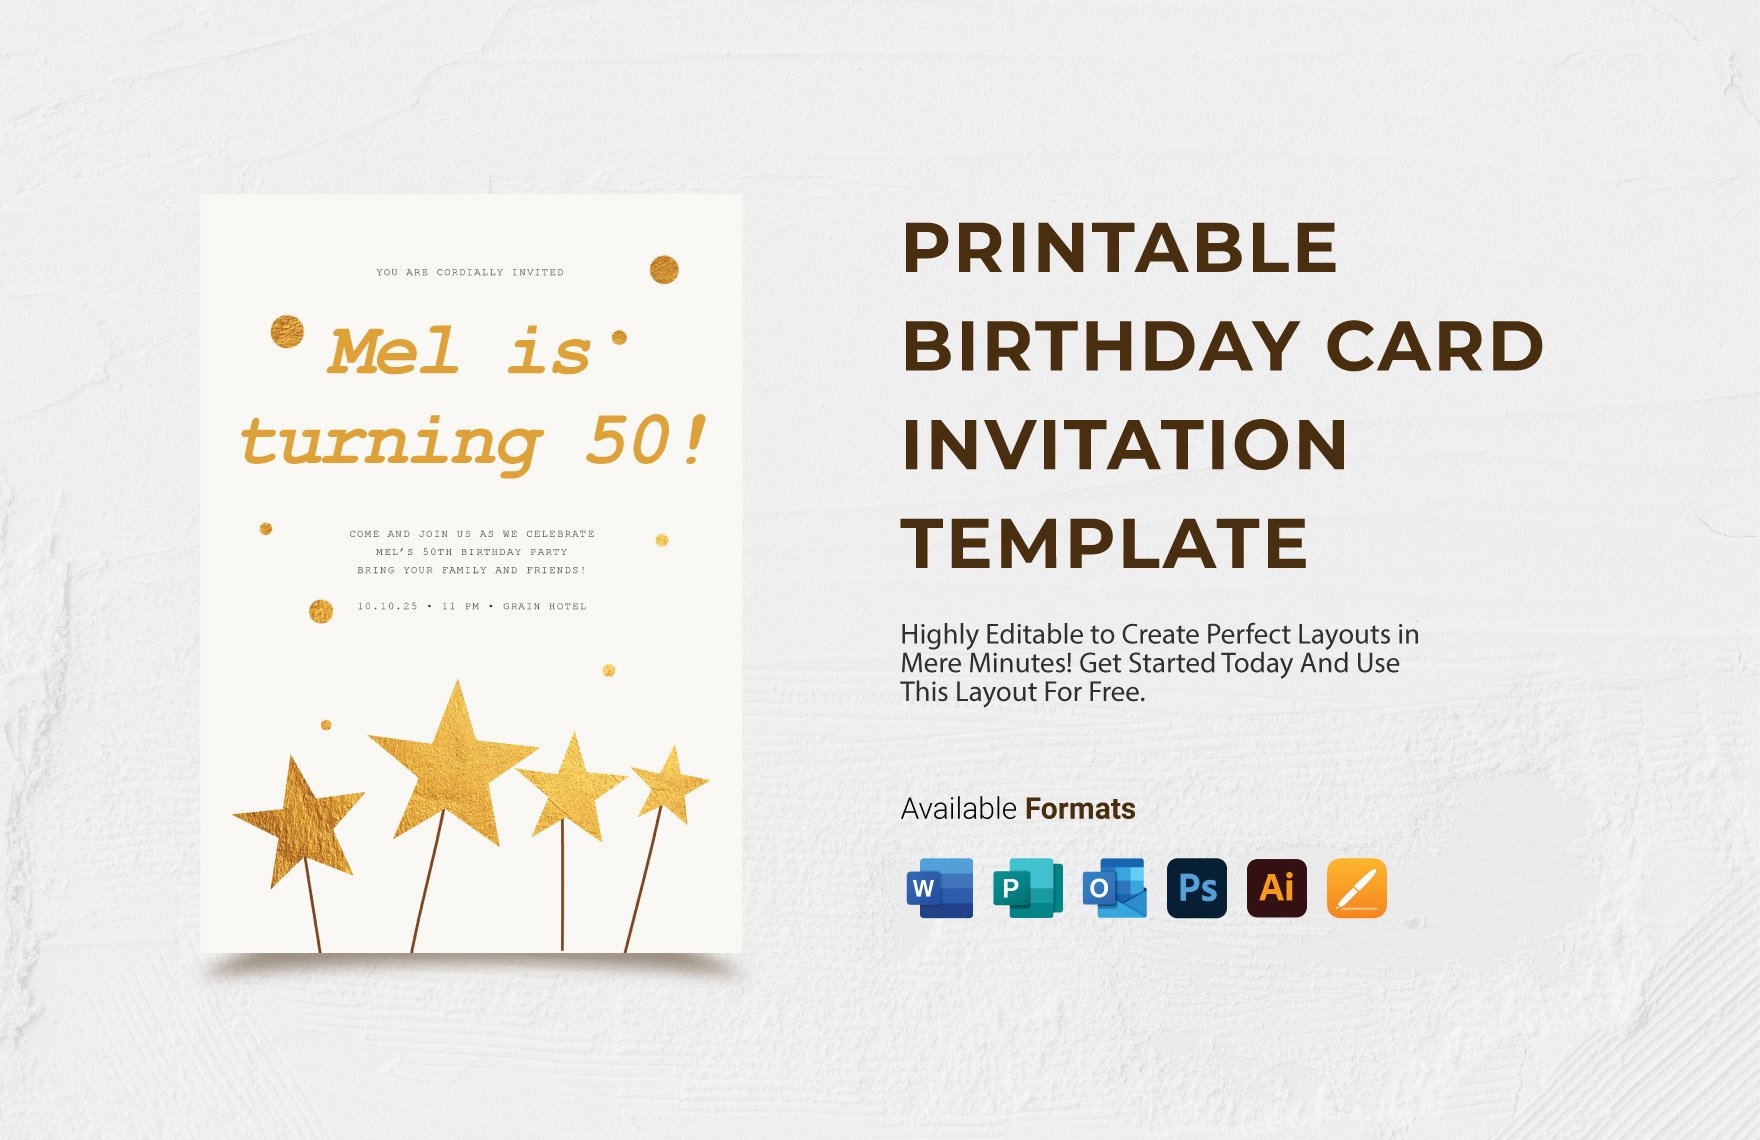 Free Printable Birthday Card Invitation Template in Word, Illustrator, PSD, Apple Pages, Publisher, Outlook